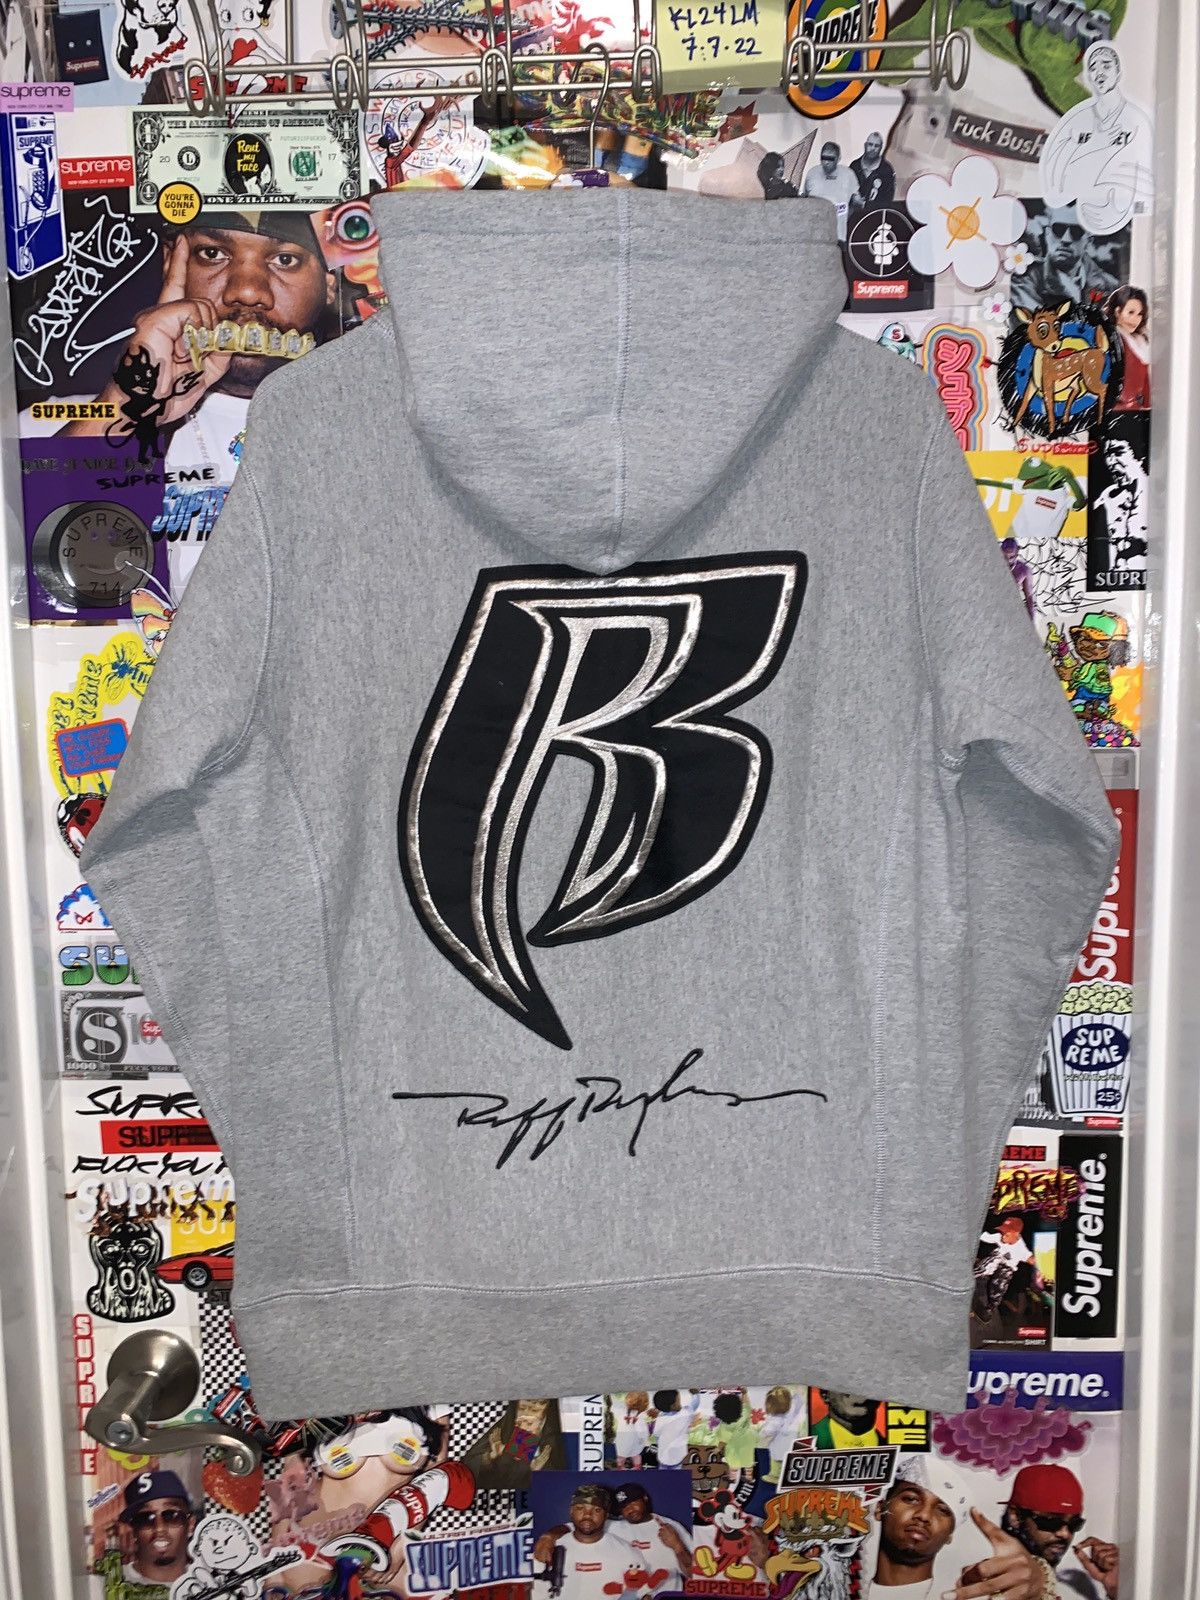 Slideshow: Supreme's Fall '14 Collection Has Ruff Ryder Hoodies and We're  All about Them